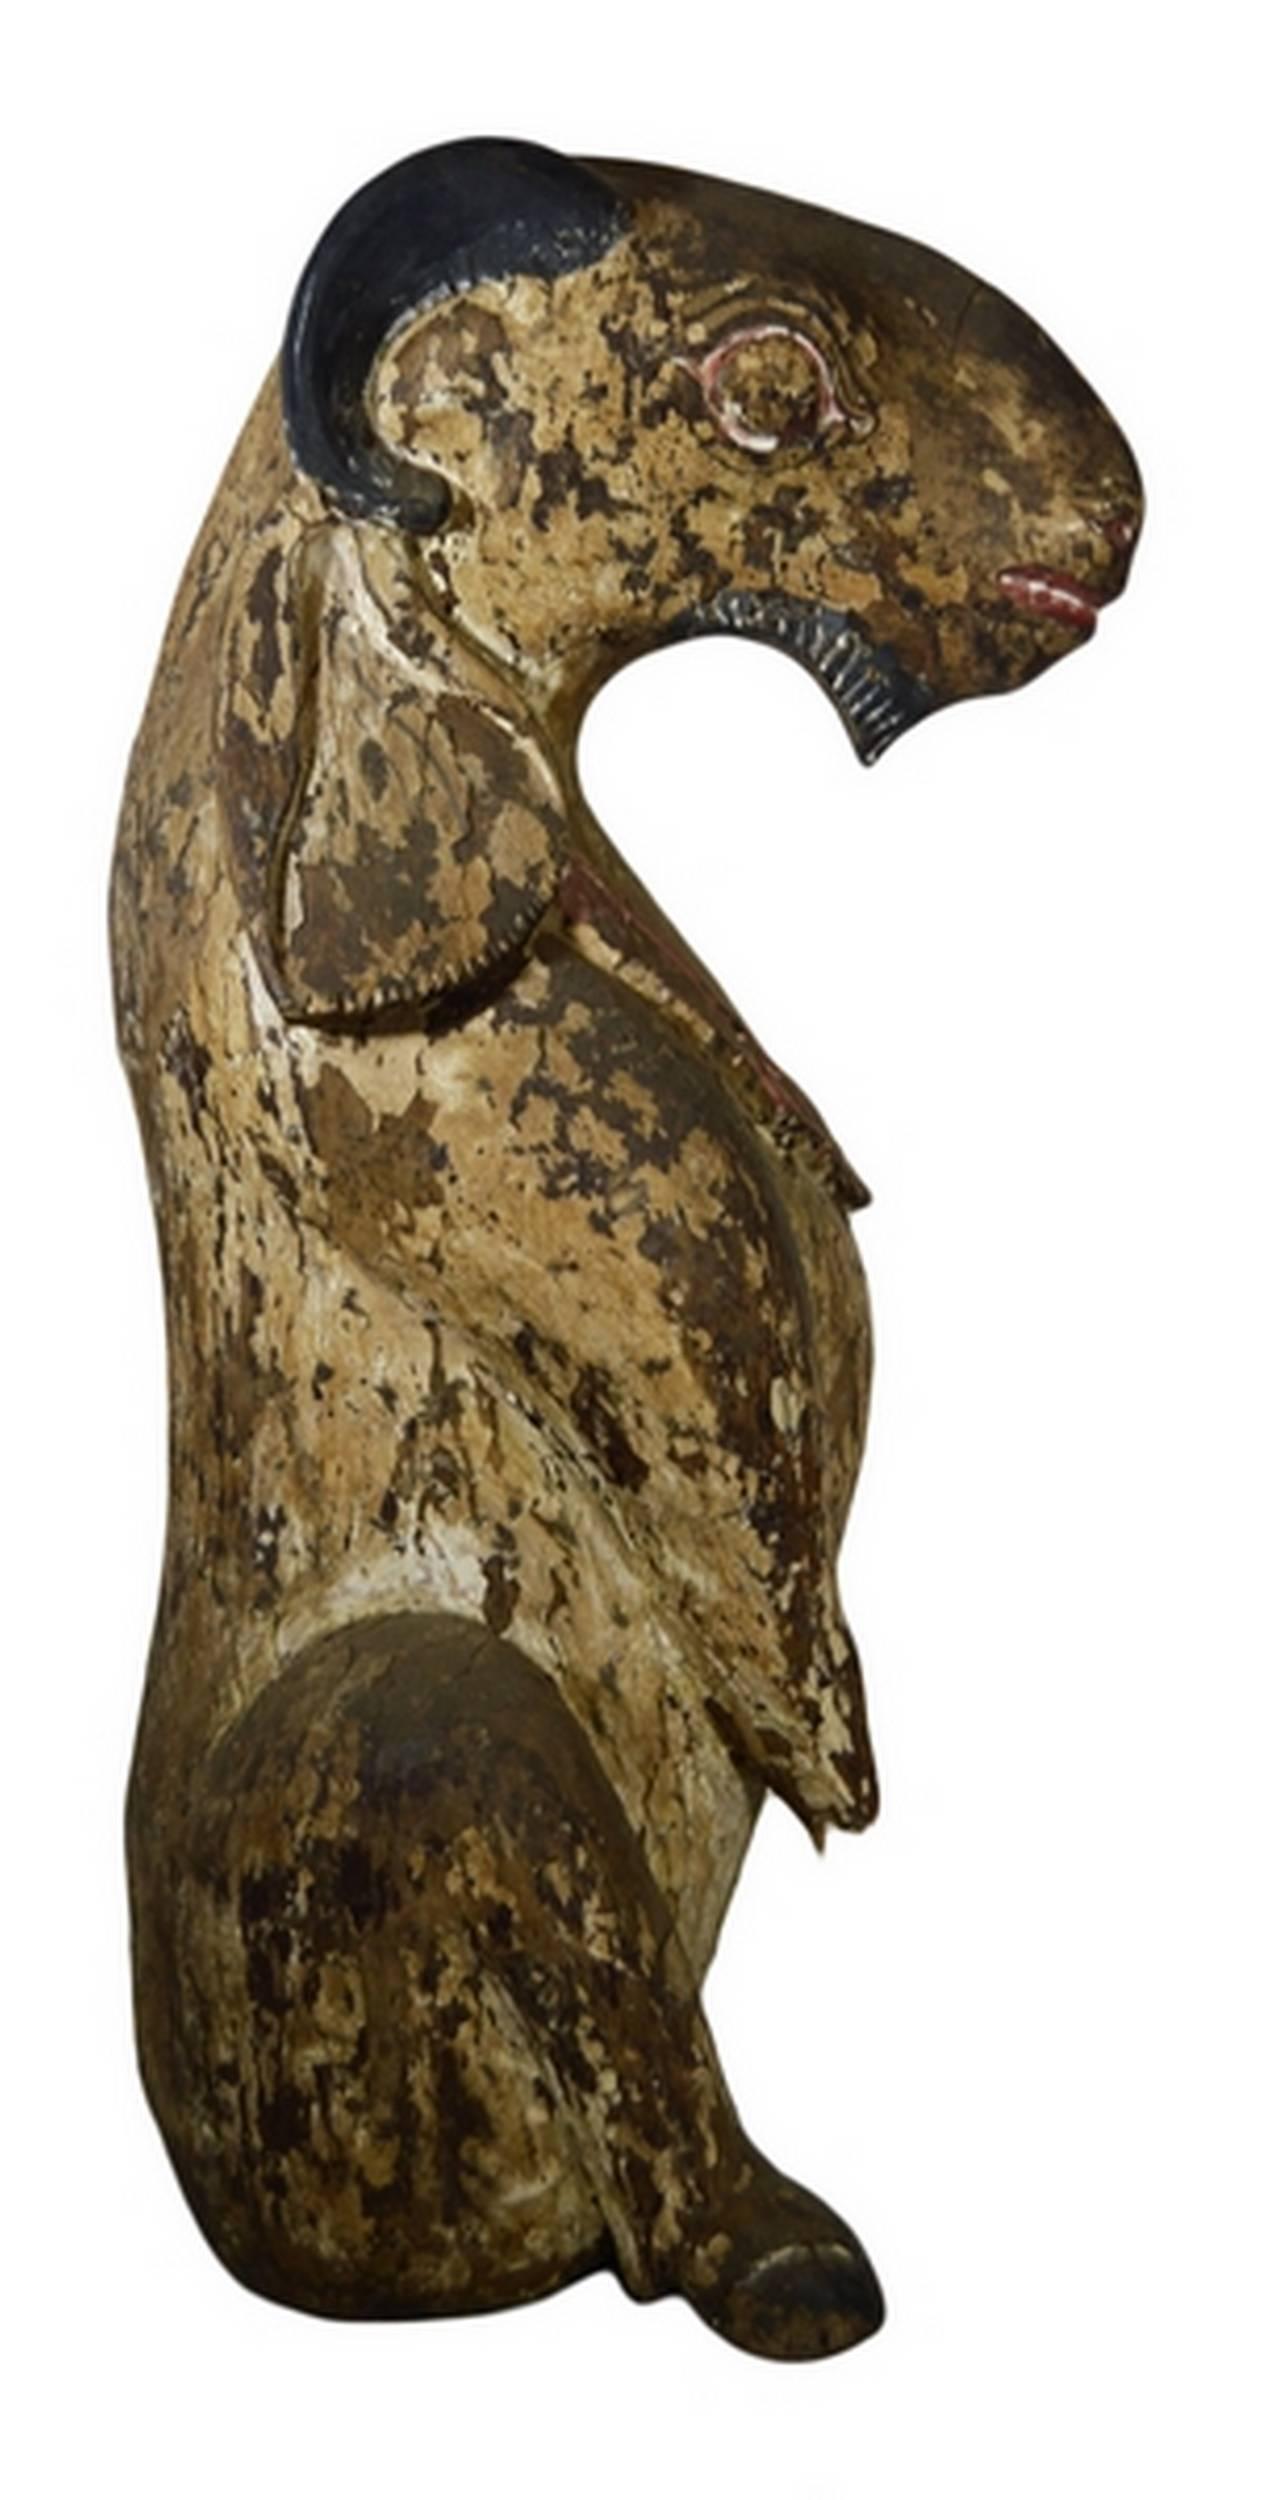 Antique Burmese Hand-Carved Wood Seated Goat Sculpture from the 19th Century In Good Condition For Sale In Yonkers, NY